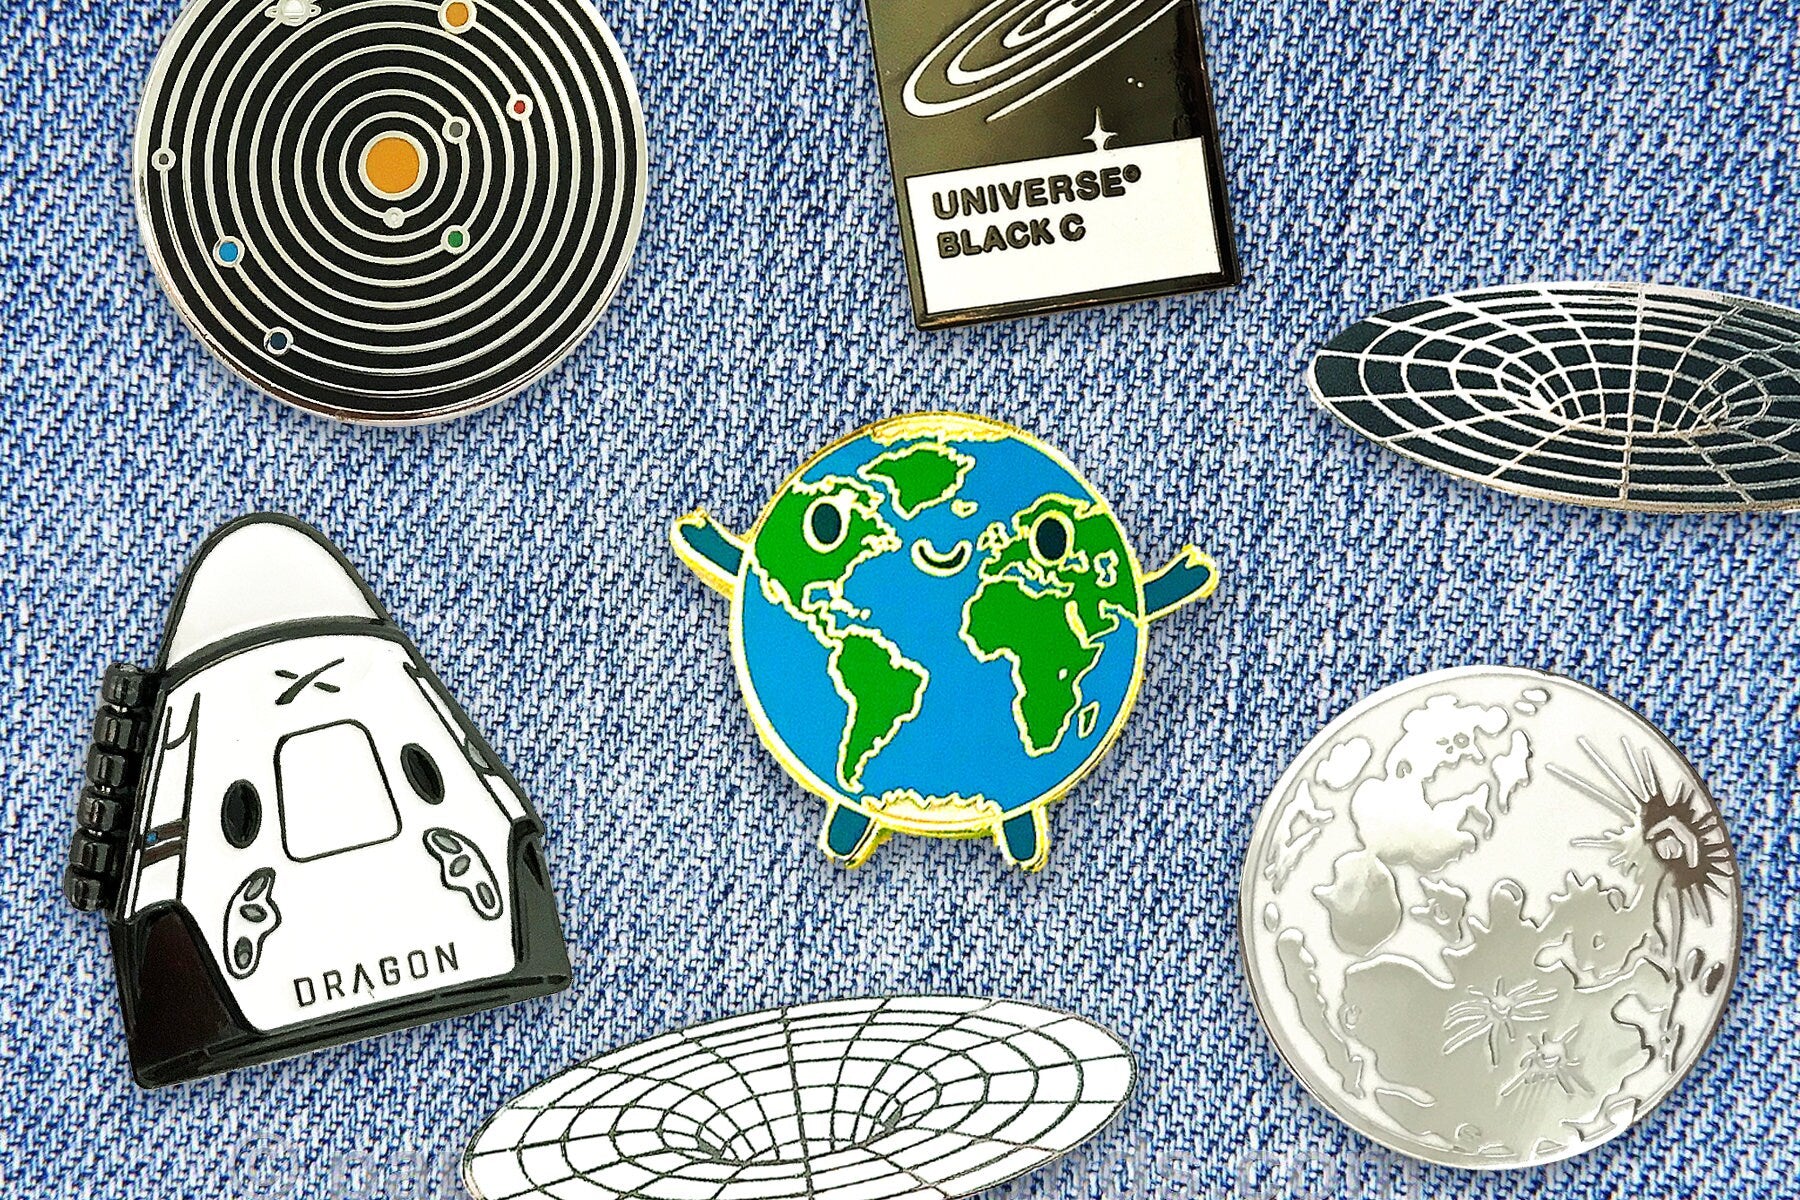 Solar System Enamel Pin - Voyager Golden Record Lapel / Brooch Pin - Space / Astronomy Gift